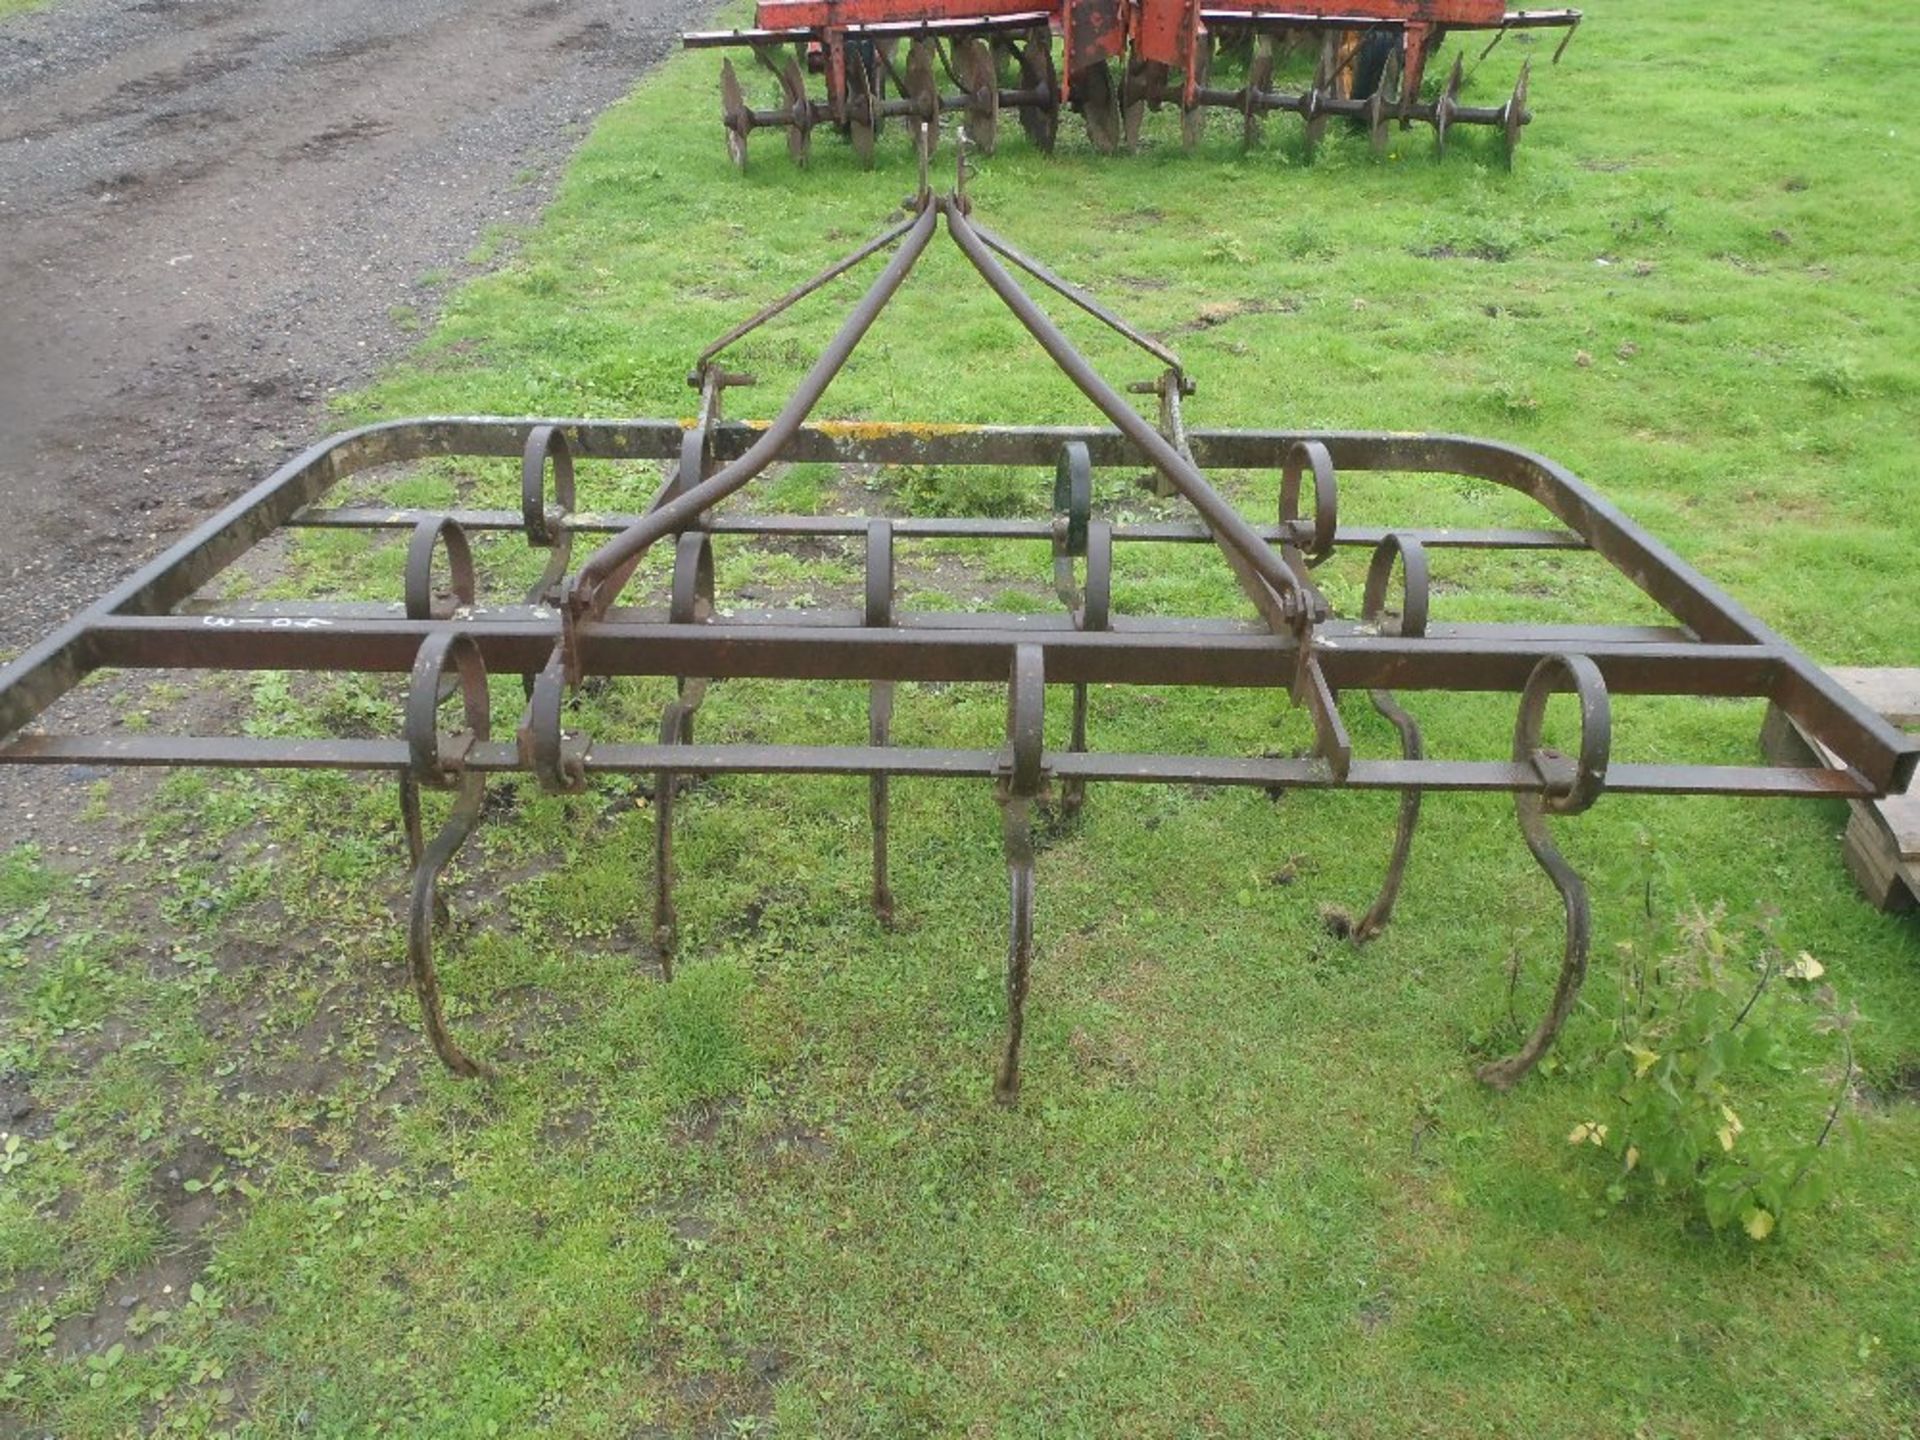 Parmiter 12ft Linkage Mounted Folding Disc Harrows - Image 7 of 7